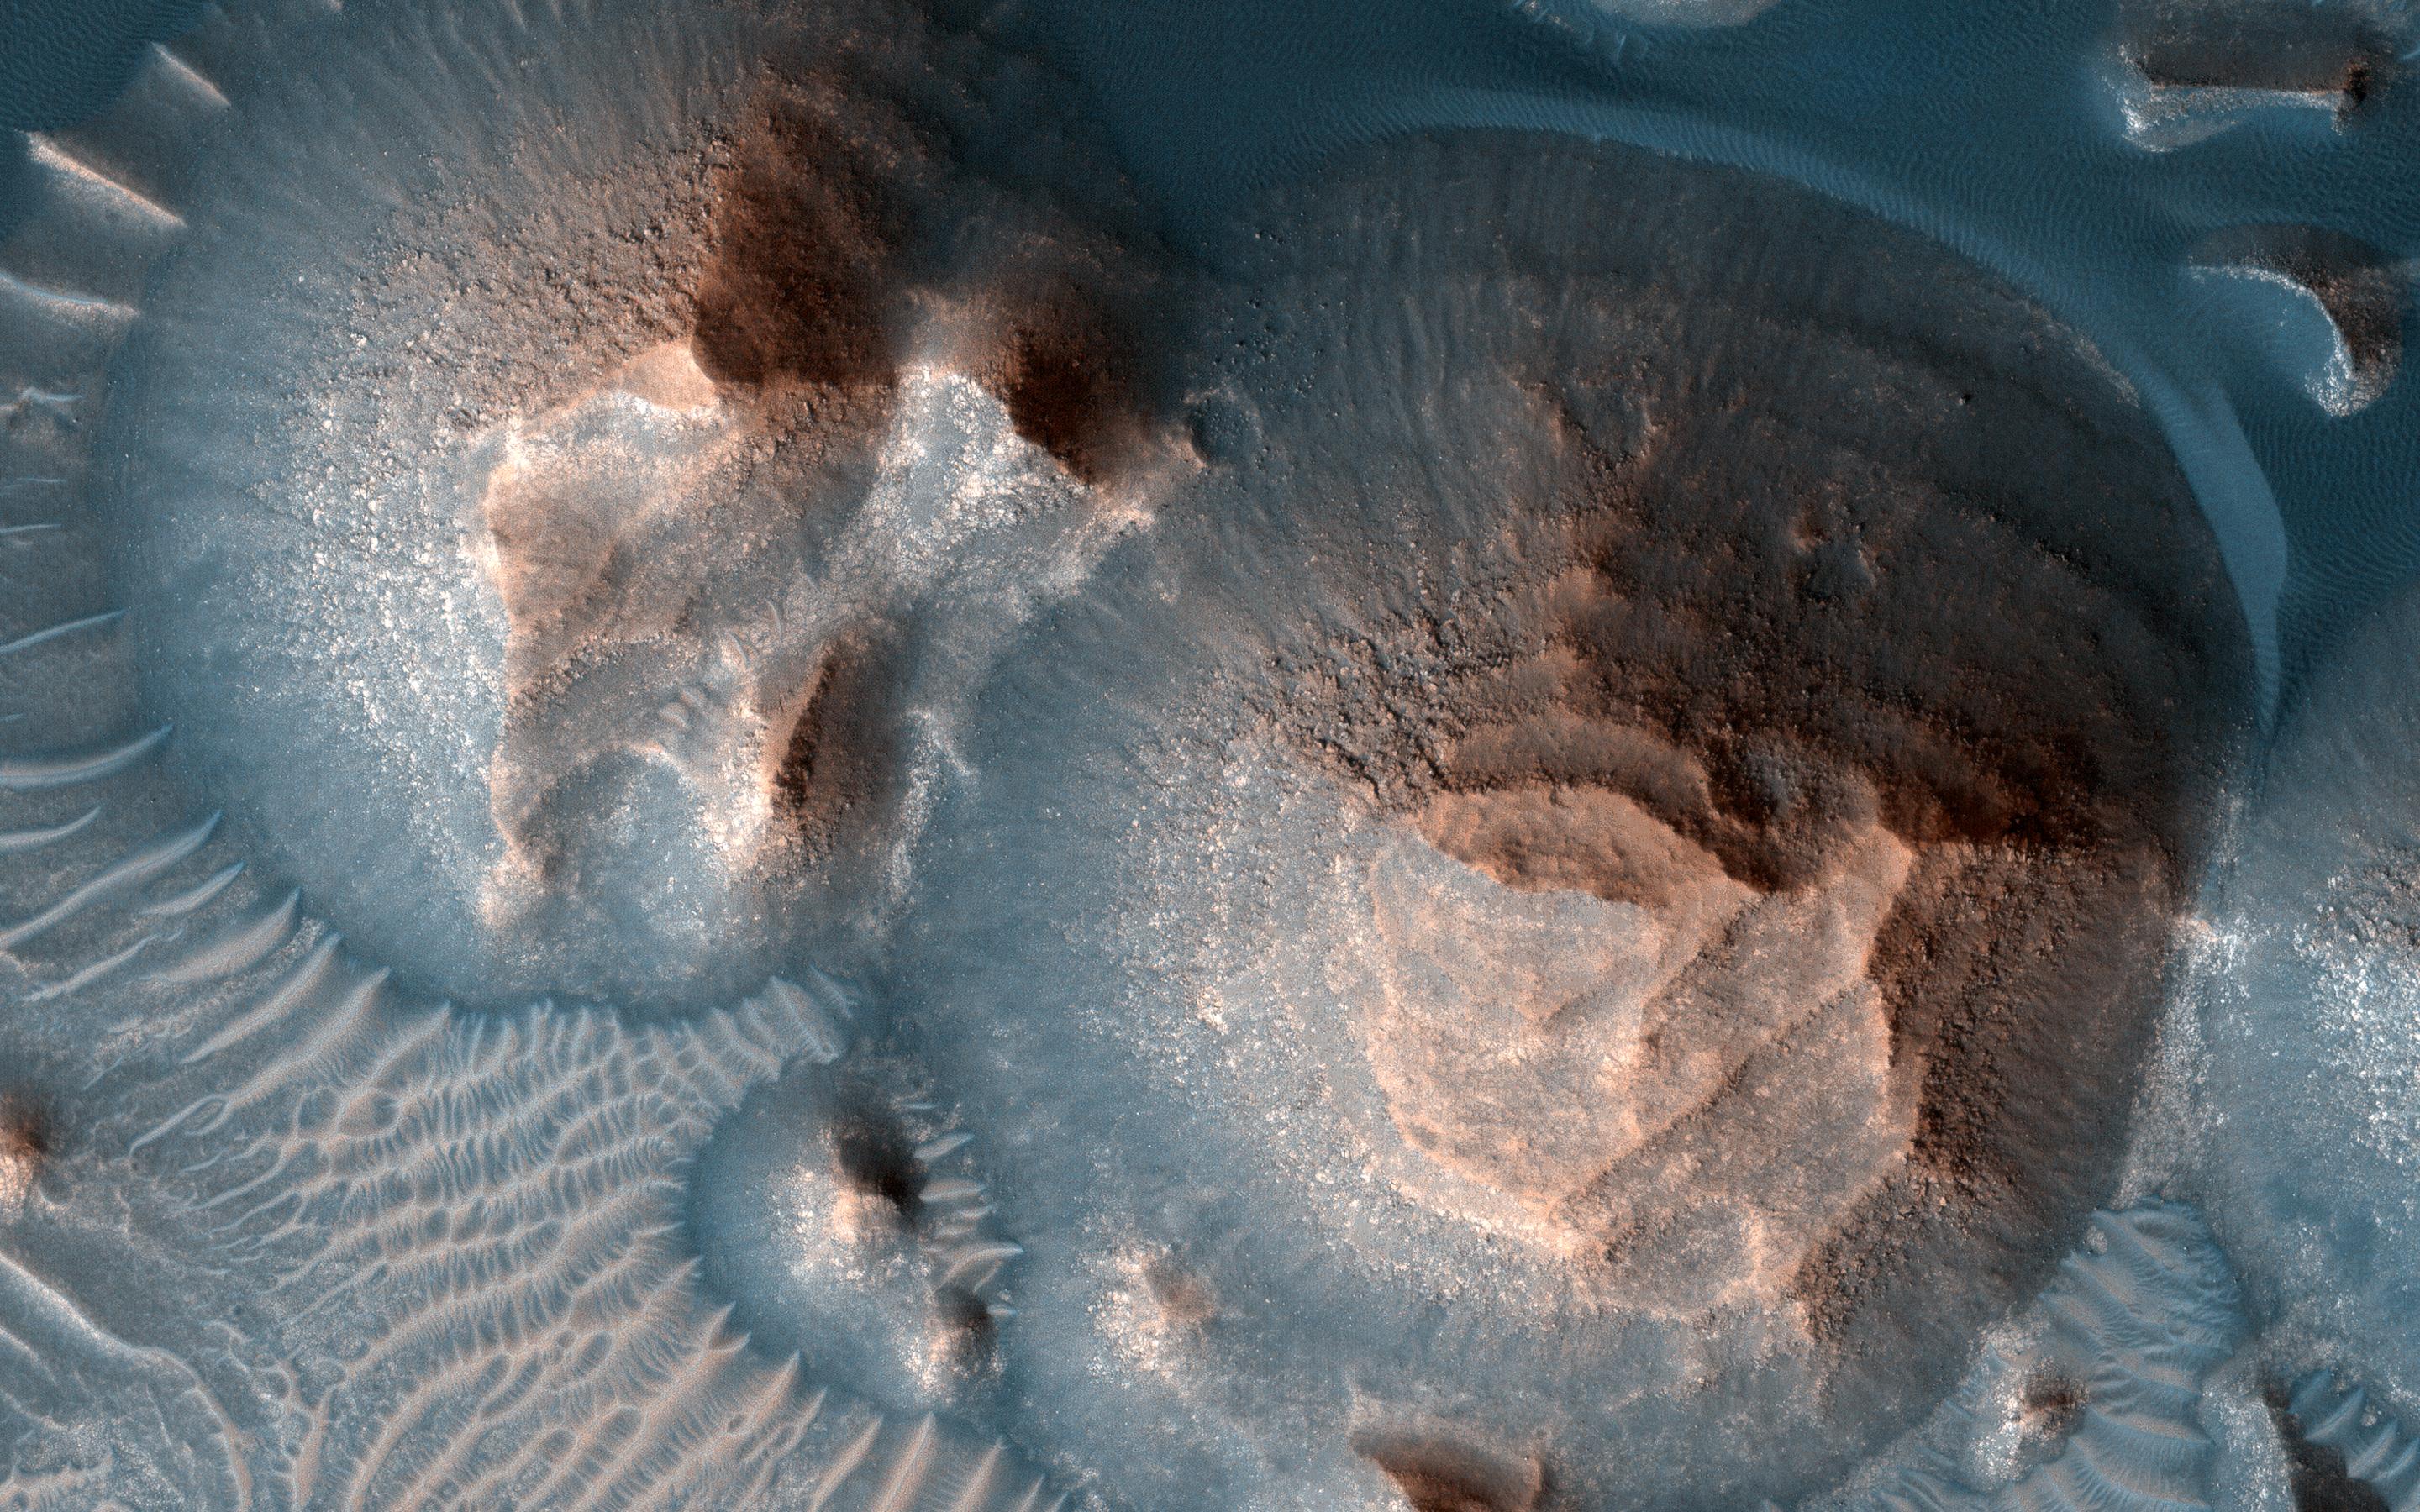 This image acquired on October 1, 2020 by NASAs Mars Reconnaissance Orbiter, shows several craters in Arabia Terra filled with layered rock.